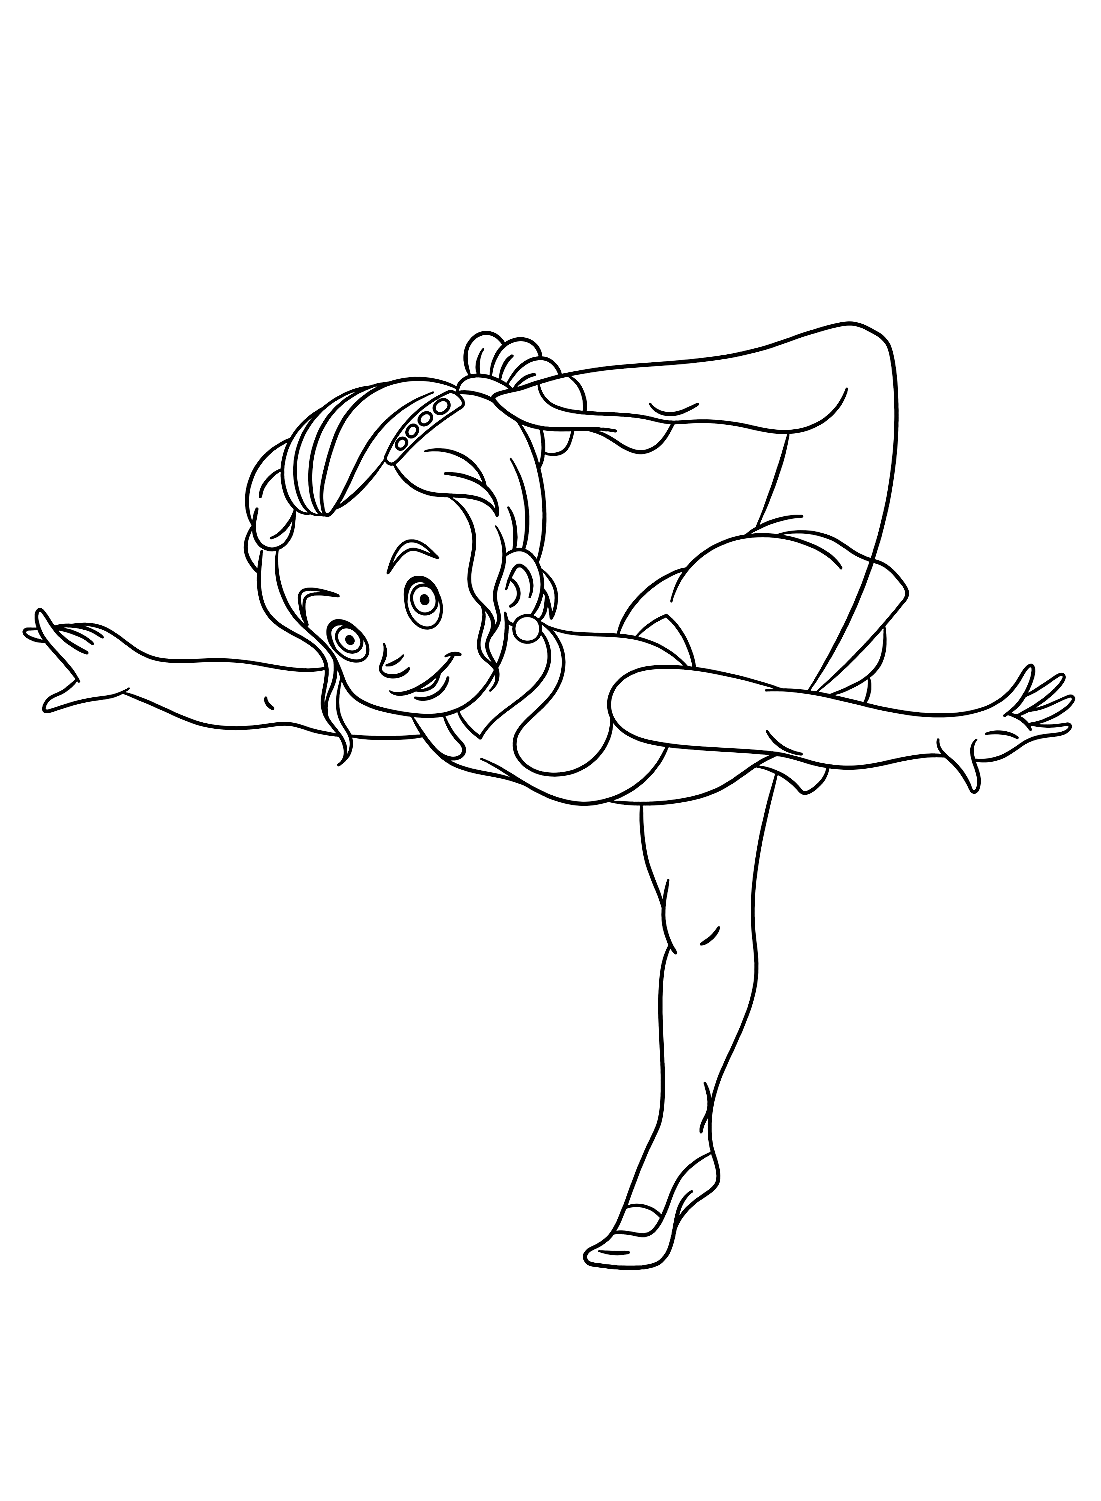 Coloring Ballerina Coloring Page